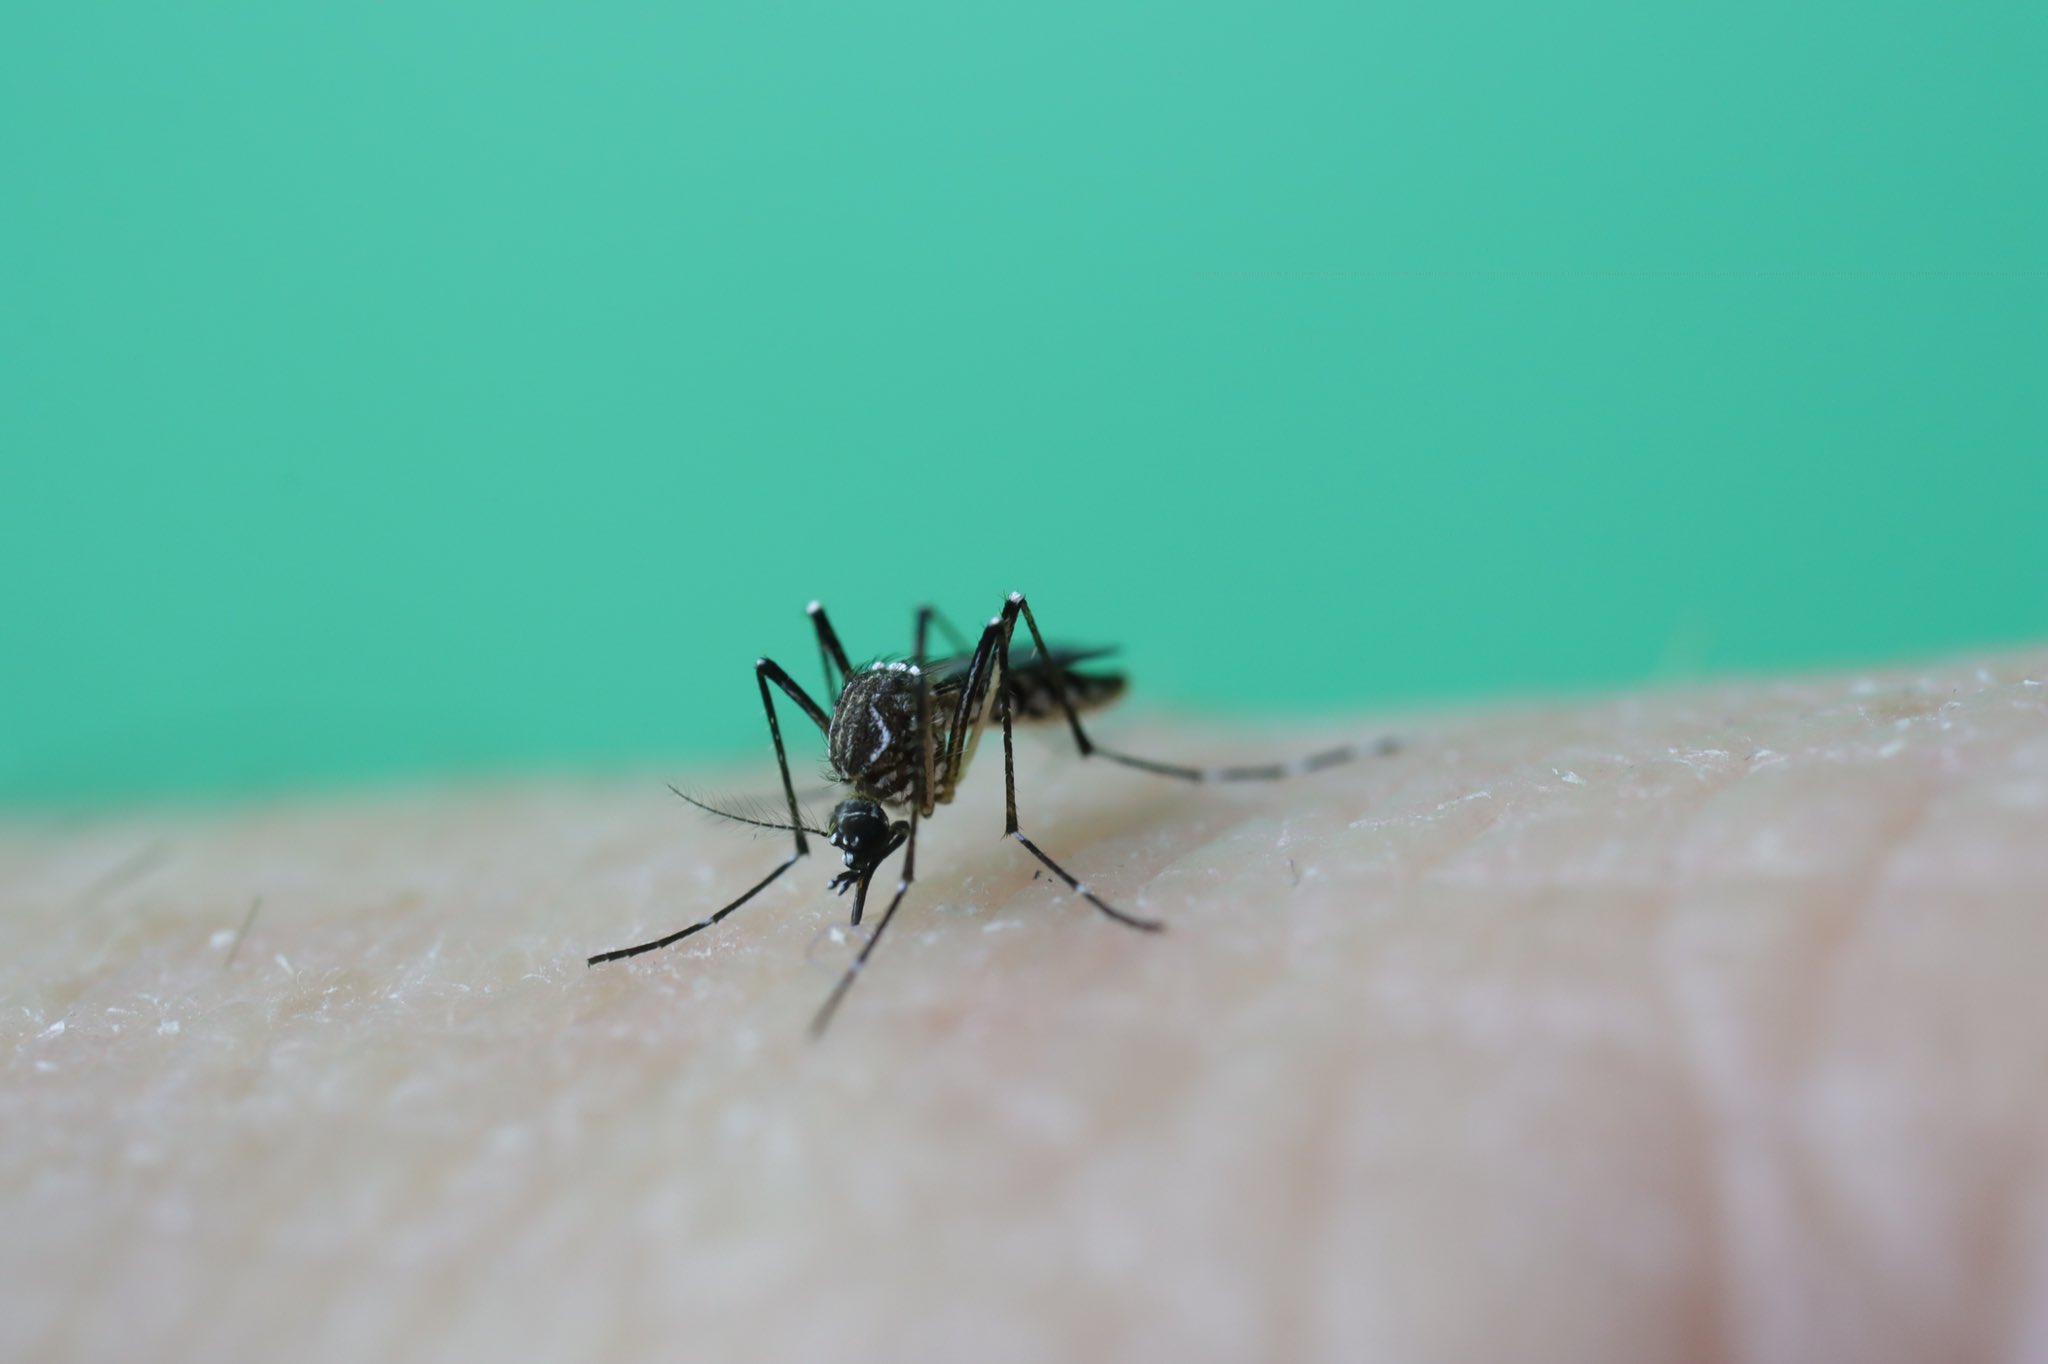 It’s warming up and mozzies are coming. Here’s how to mosquito-proof your backyard